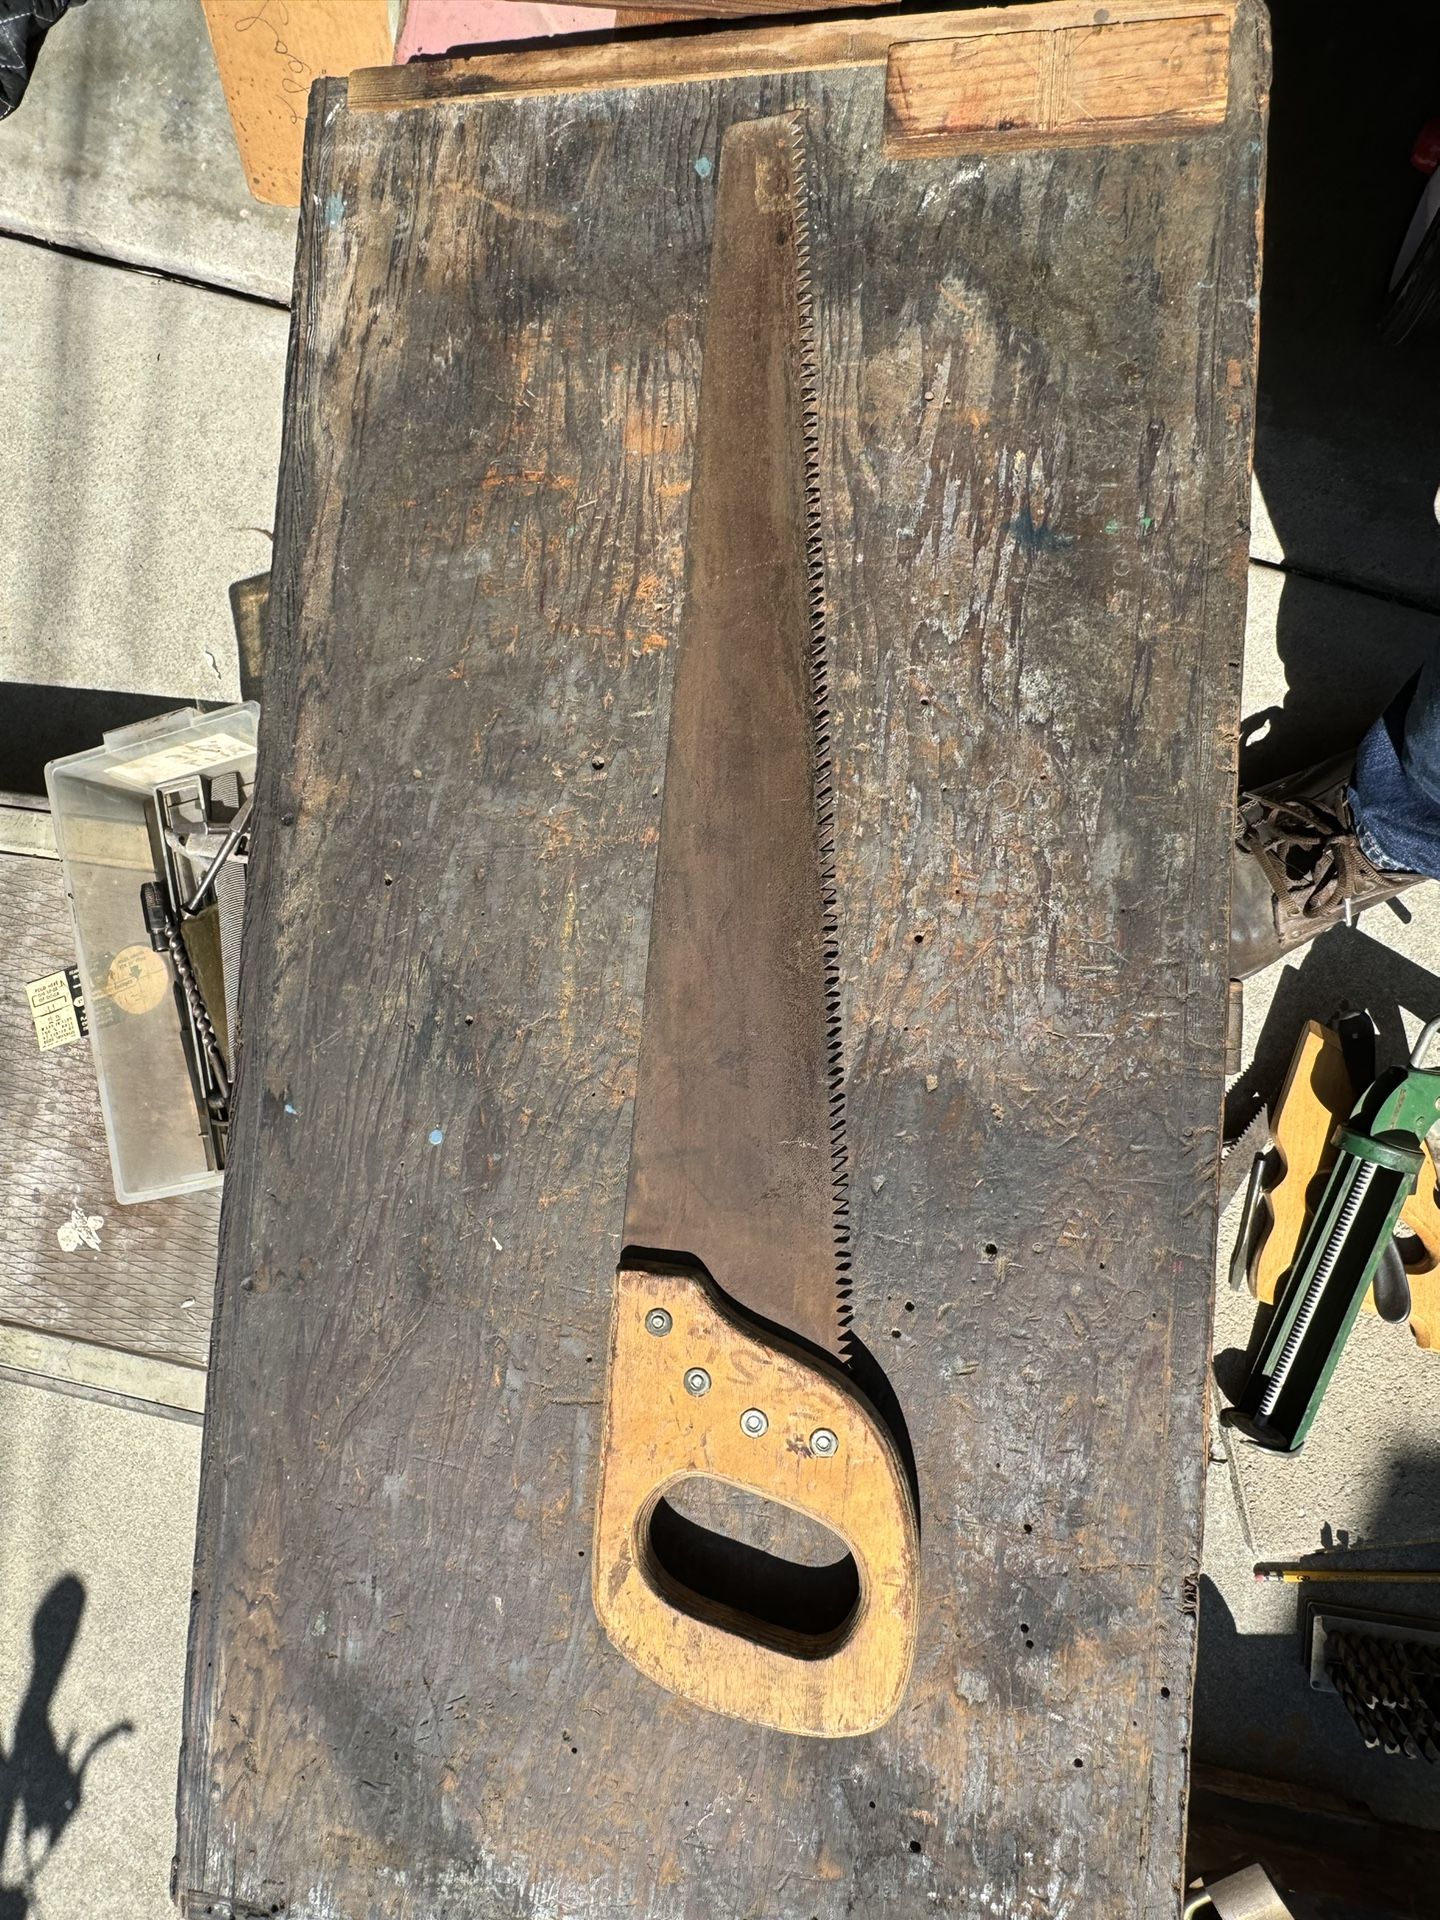 Hand Saw "The Fanno Saw Works" No.8 (HTF) Chico, Cal.